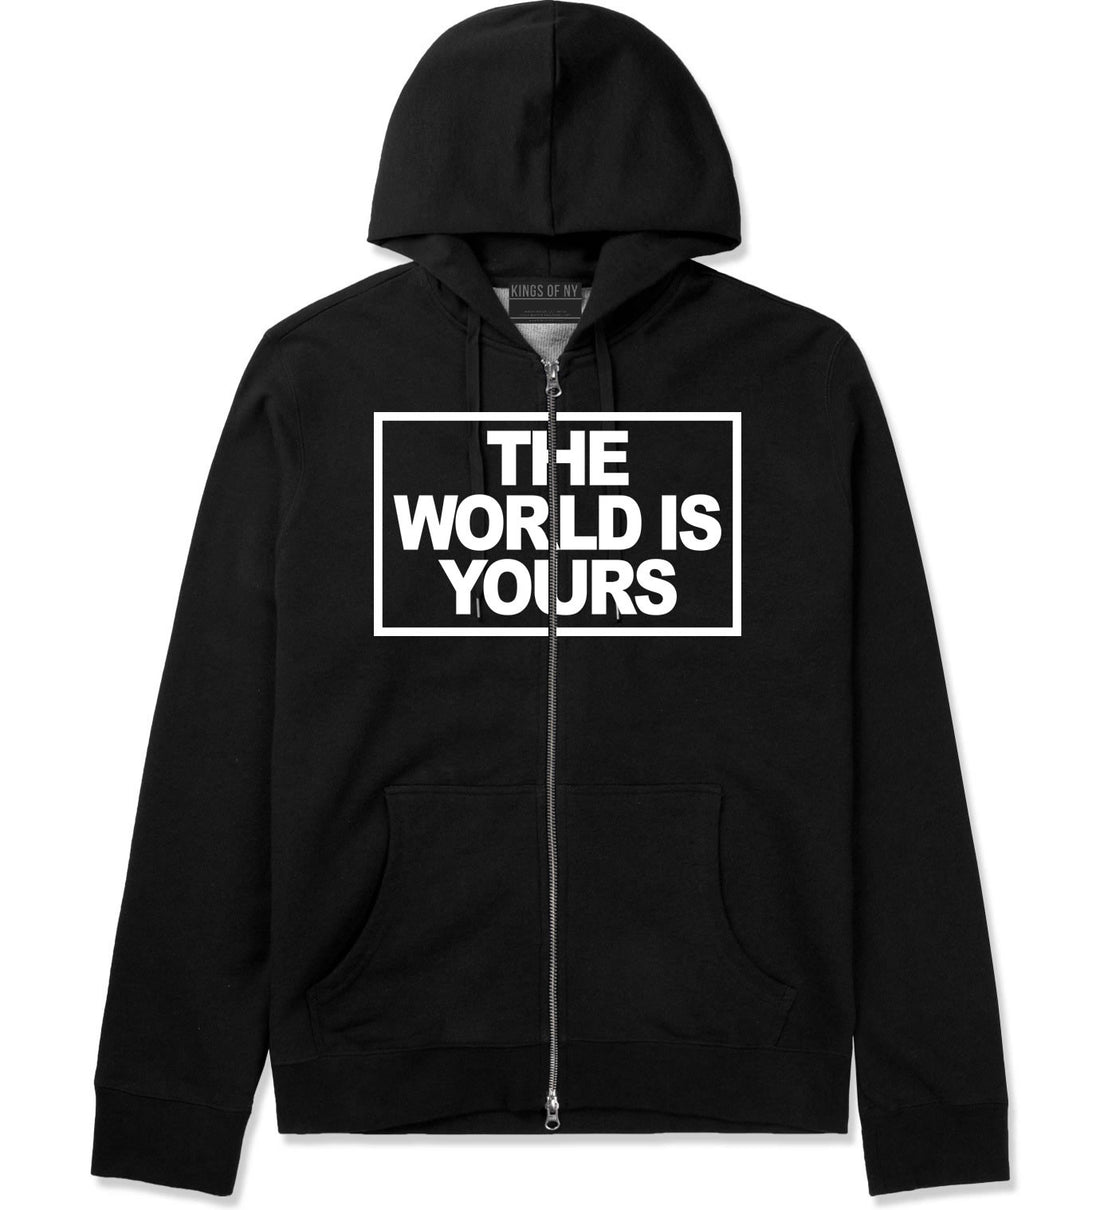 The World Is Yours Zip Up Hoodie in Black By Kings Of NY